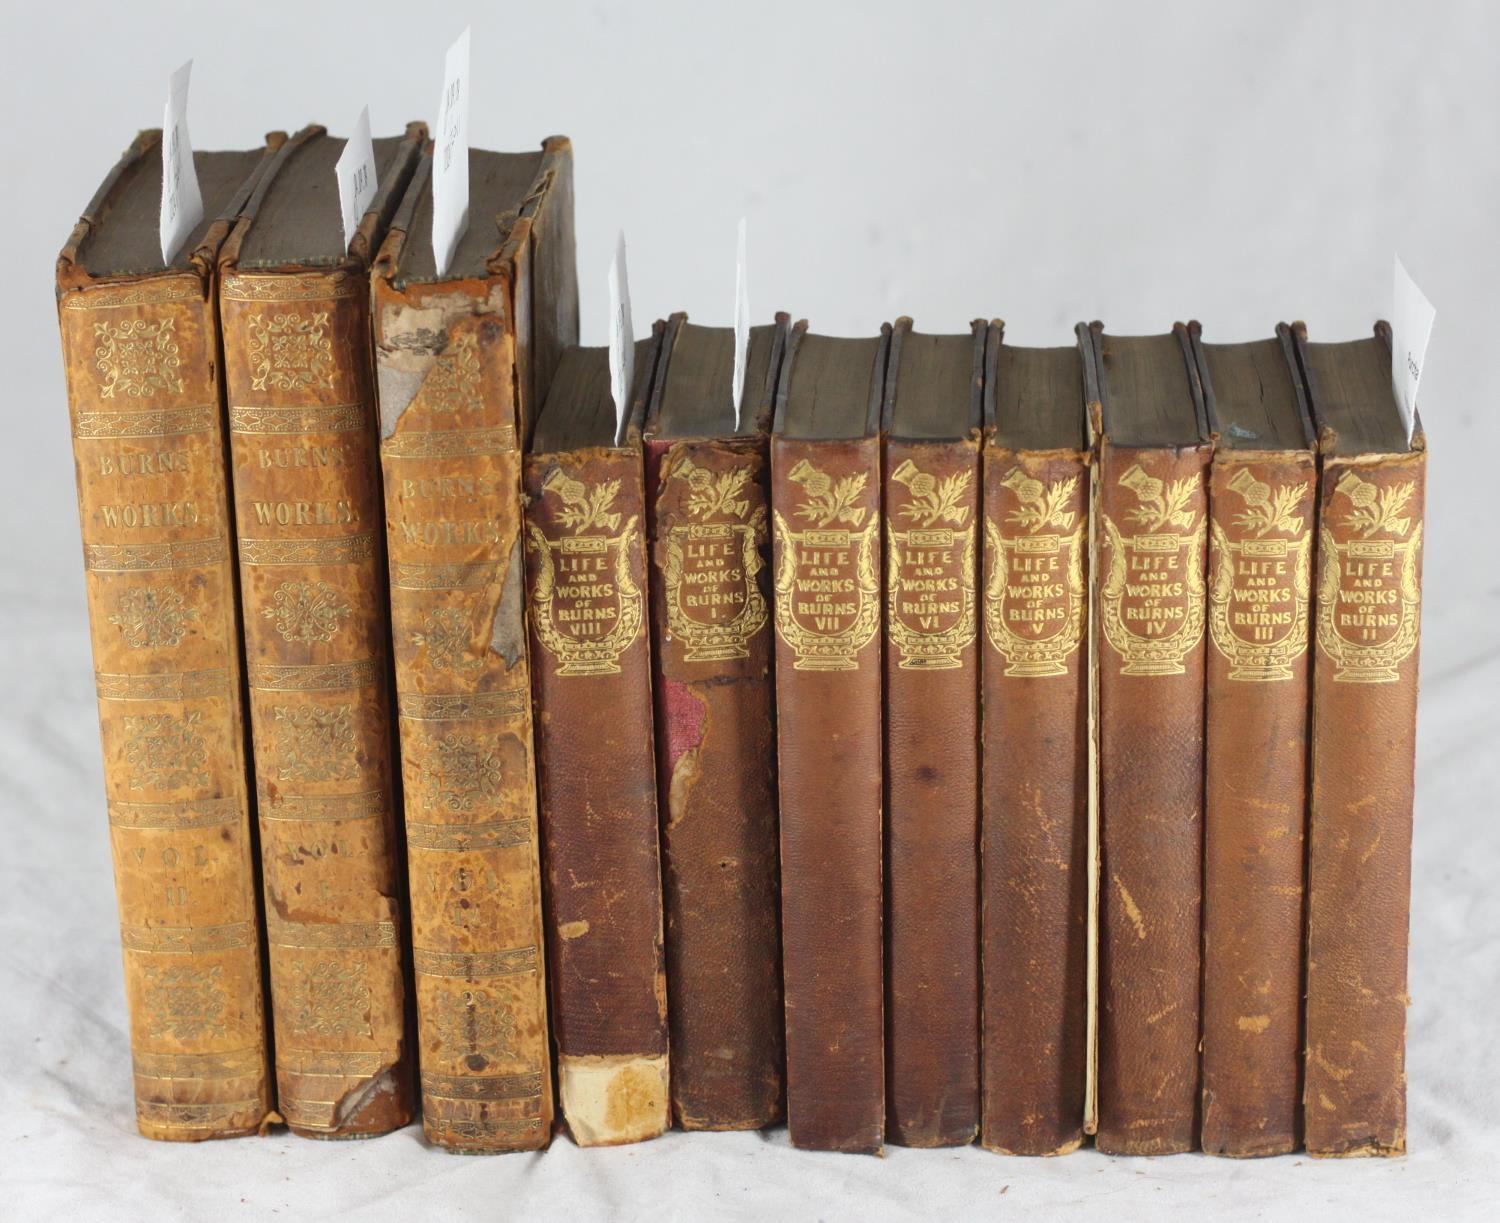 The Life and Works of Robert Burns, 8 volumes, in gilt-tooled red covers, published by James